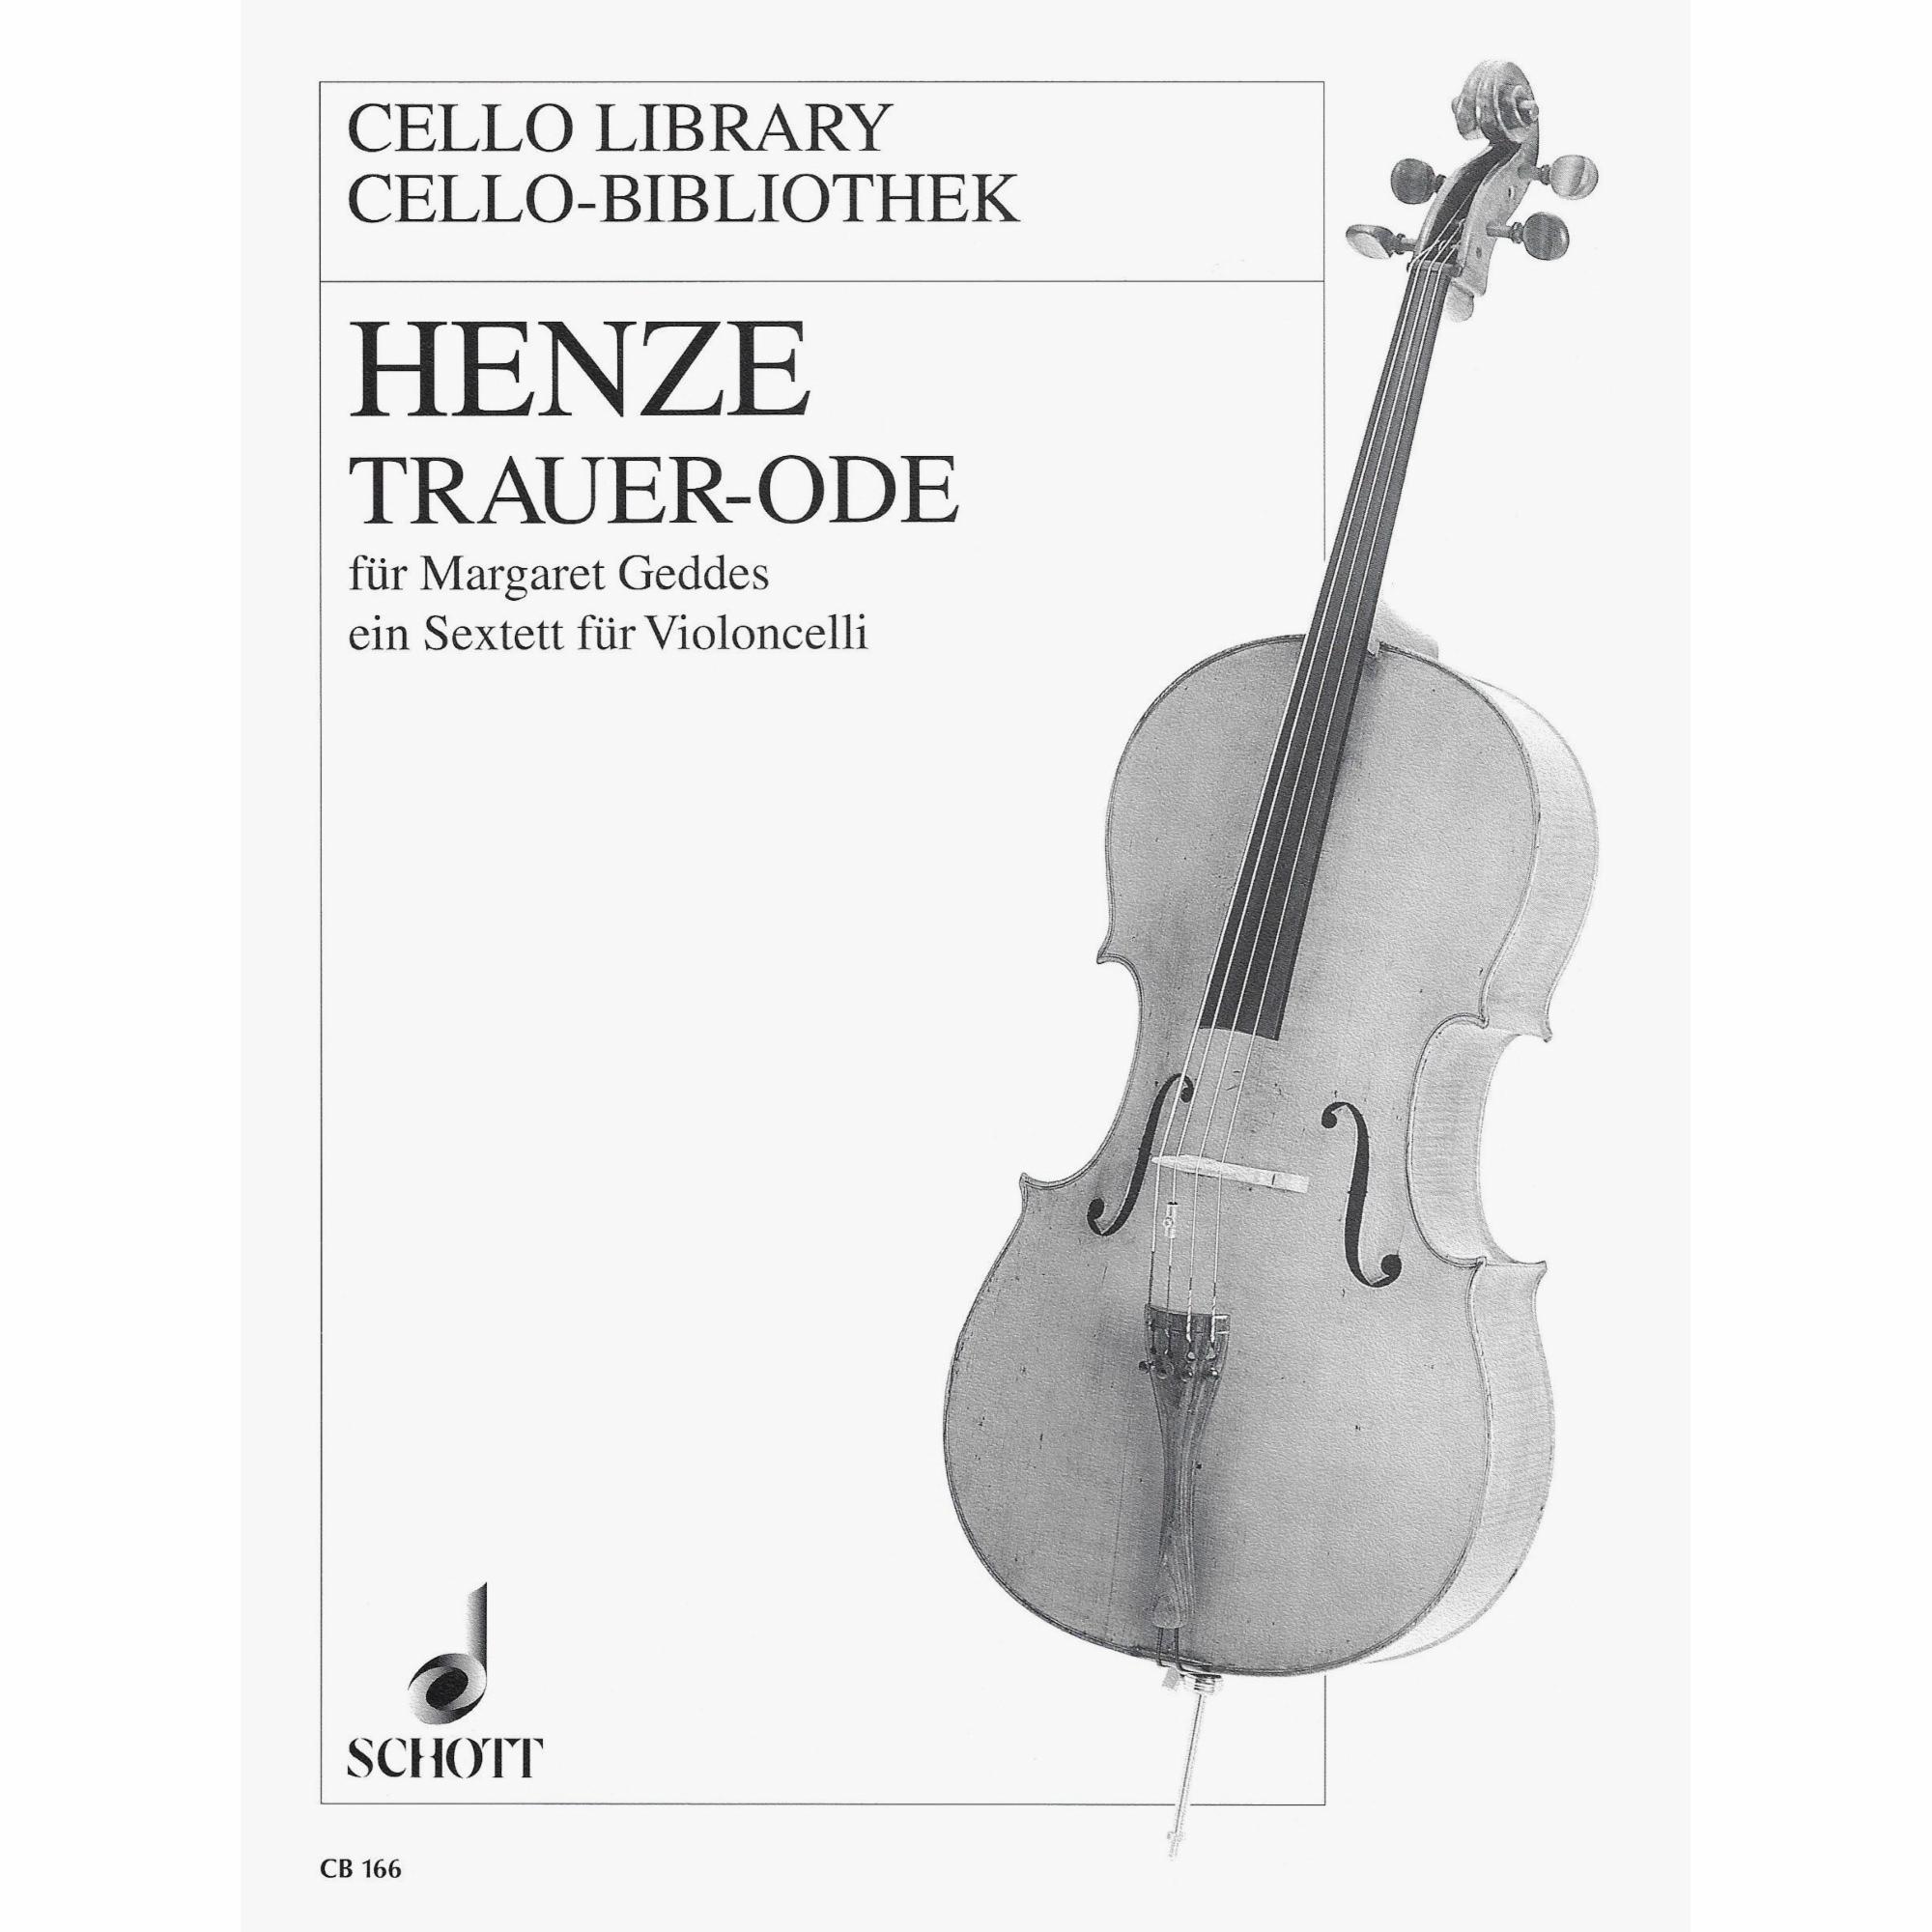 Henze -- Trauer-Ode for Six Cellos